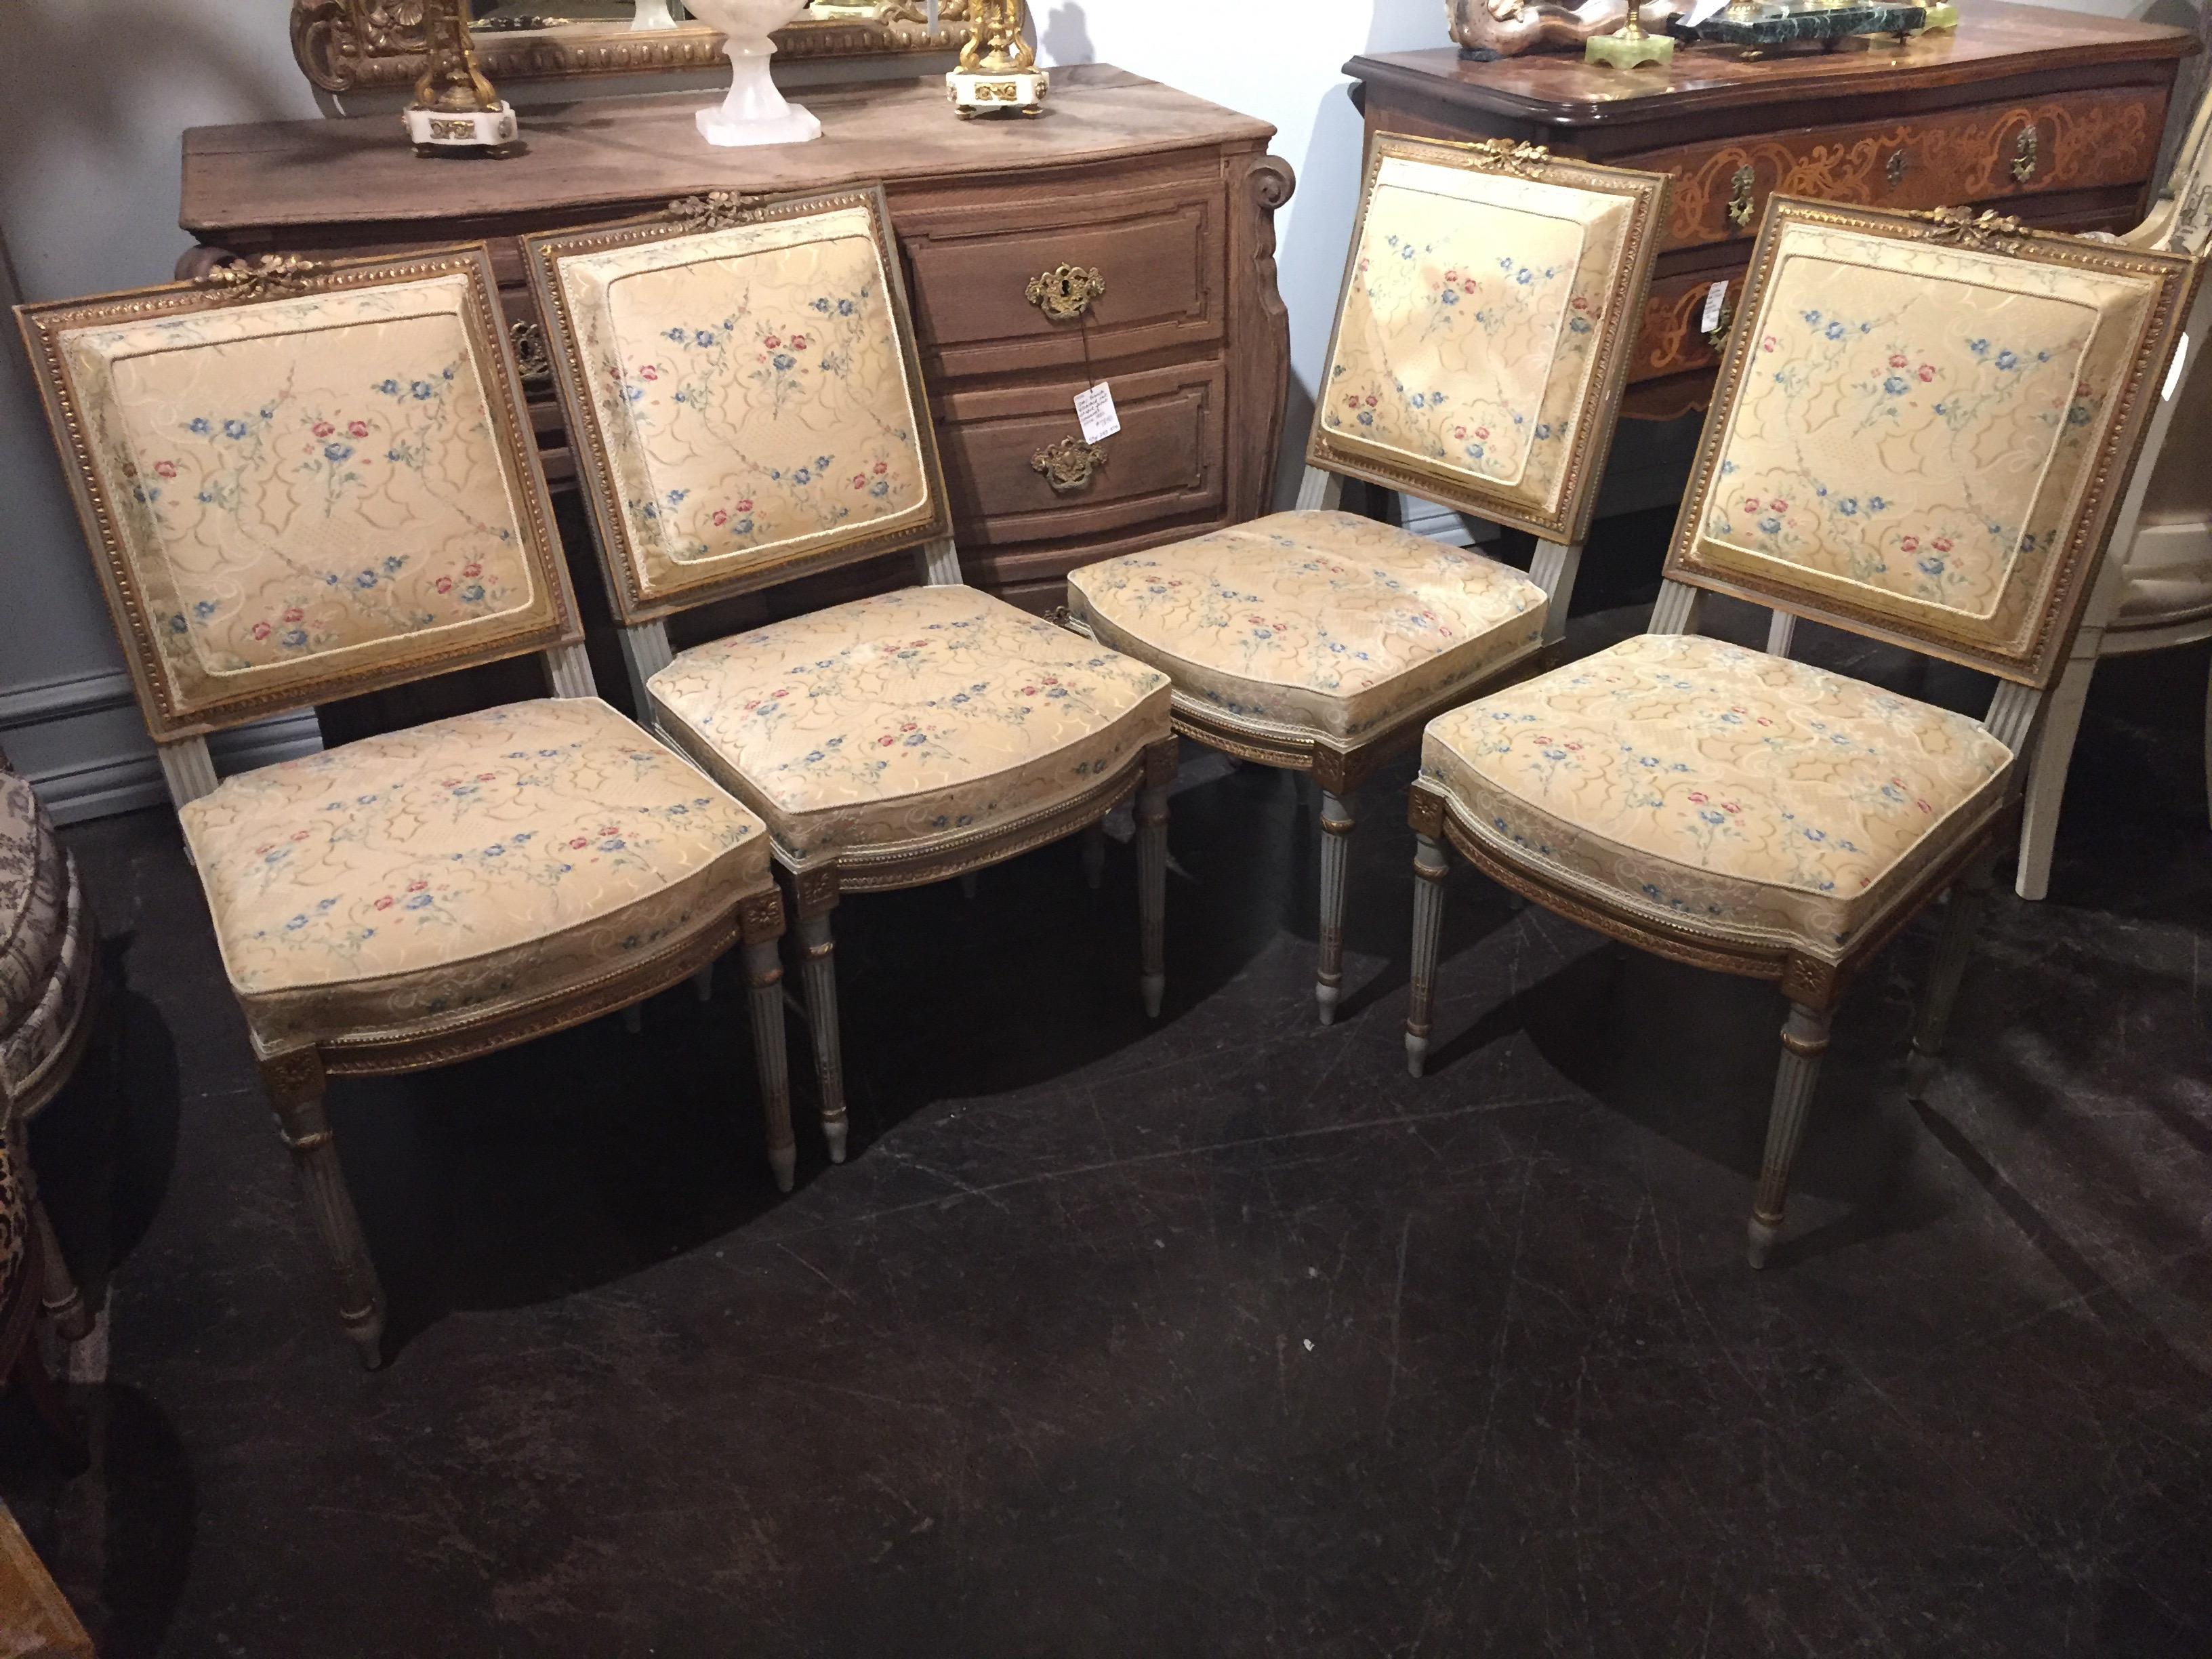 Very fine set of 4 hand carved Louis XVI style side chairs. They are upholstered in yellow floral silk fabric on the front of the chairs and the back of the chairs has a yellow and sage green plaid silk fabric. The wood is painted in a sage green